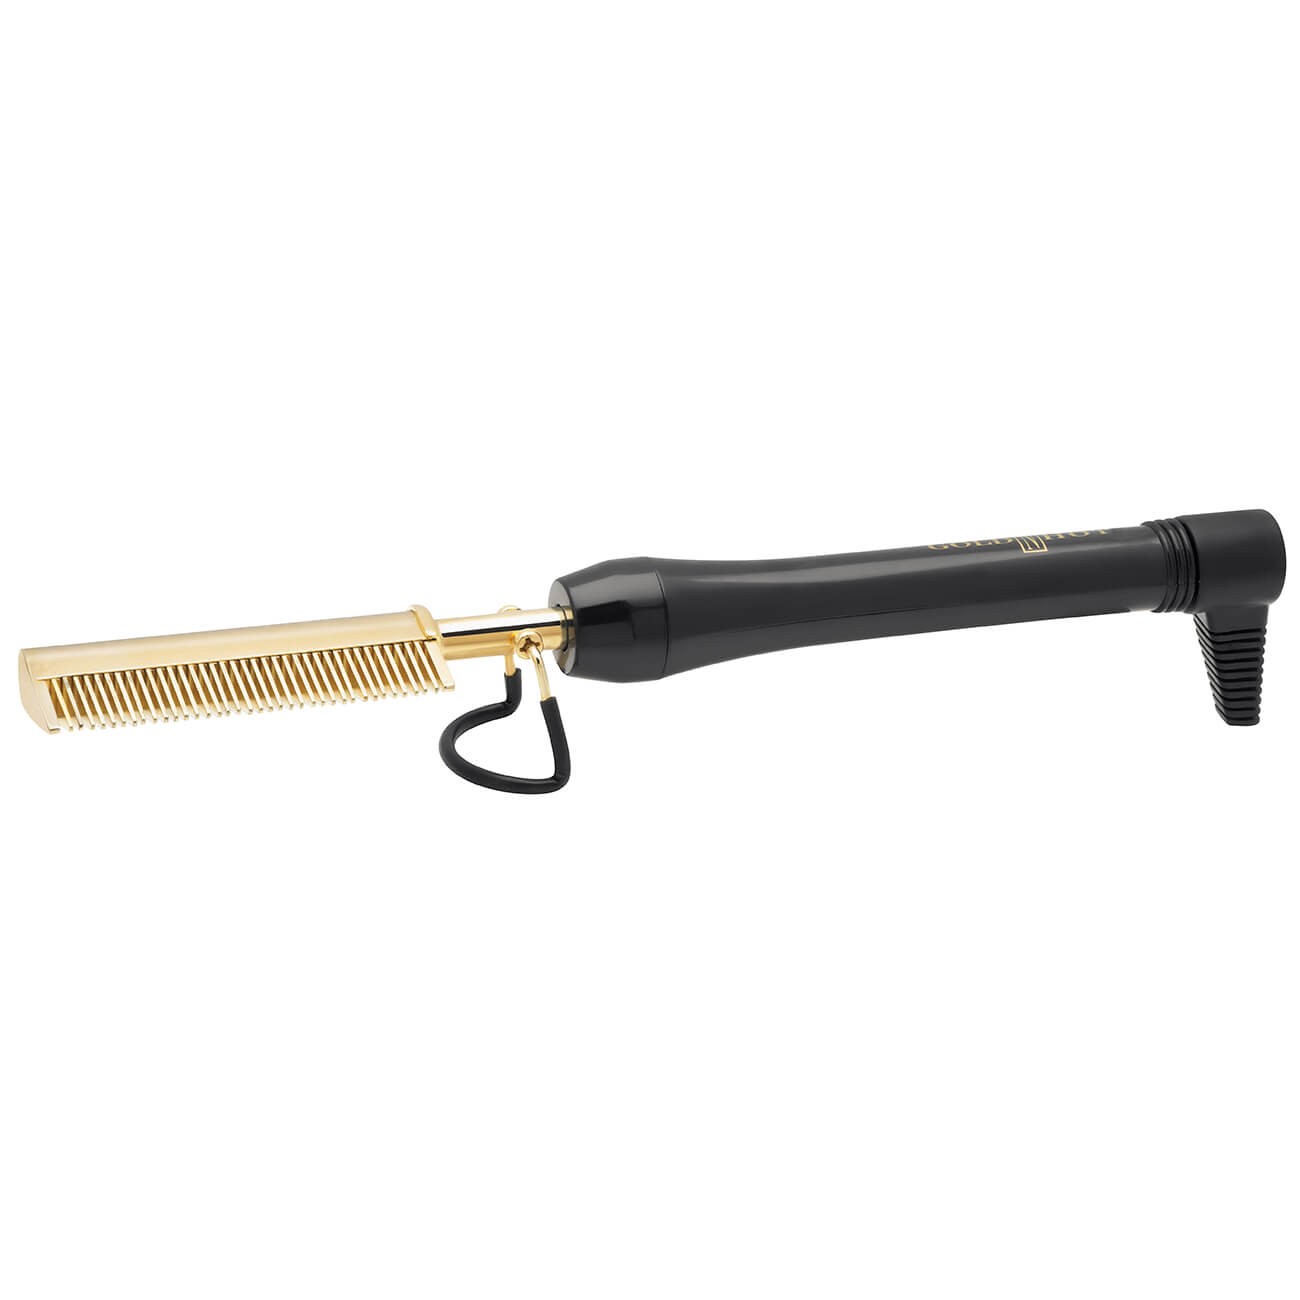 Gold N Hot Professional Styling Comb